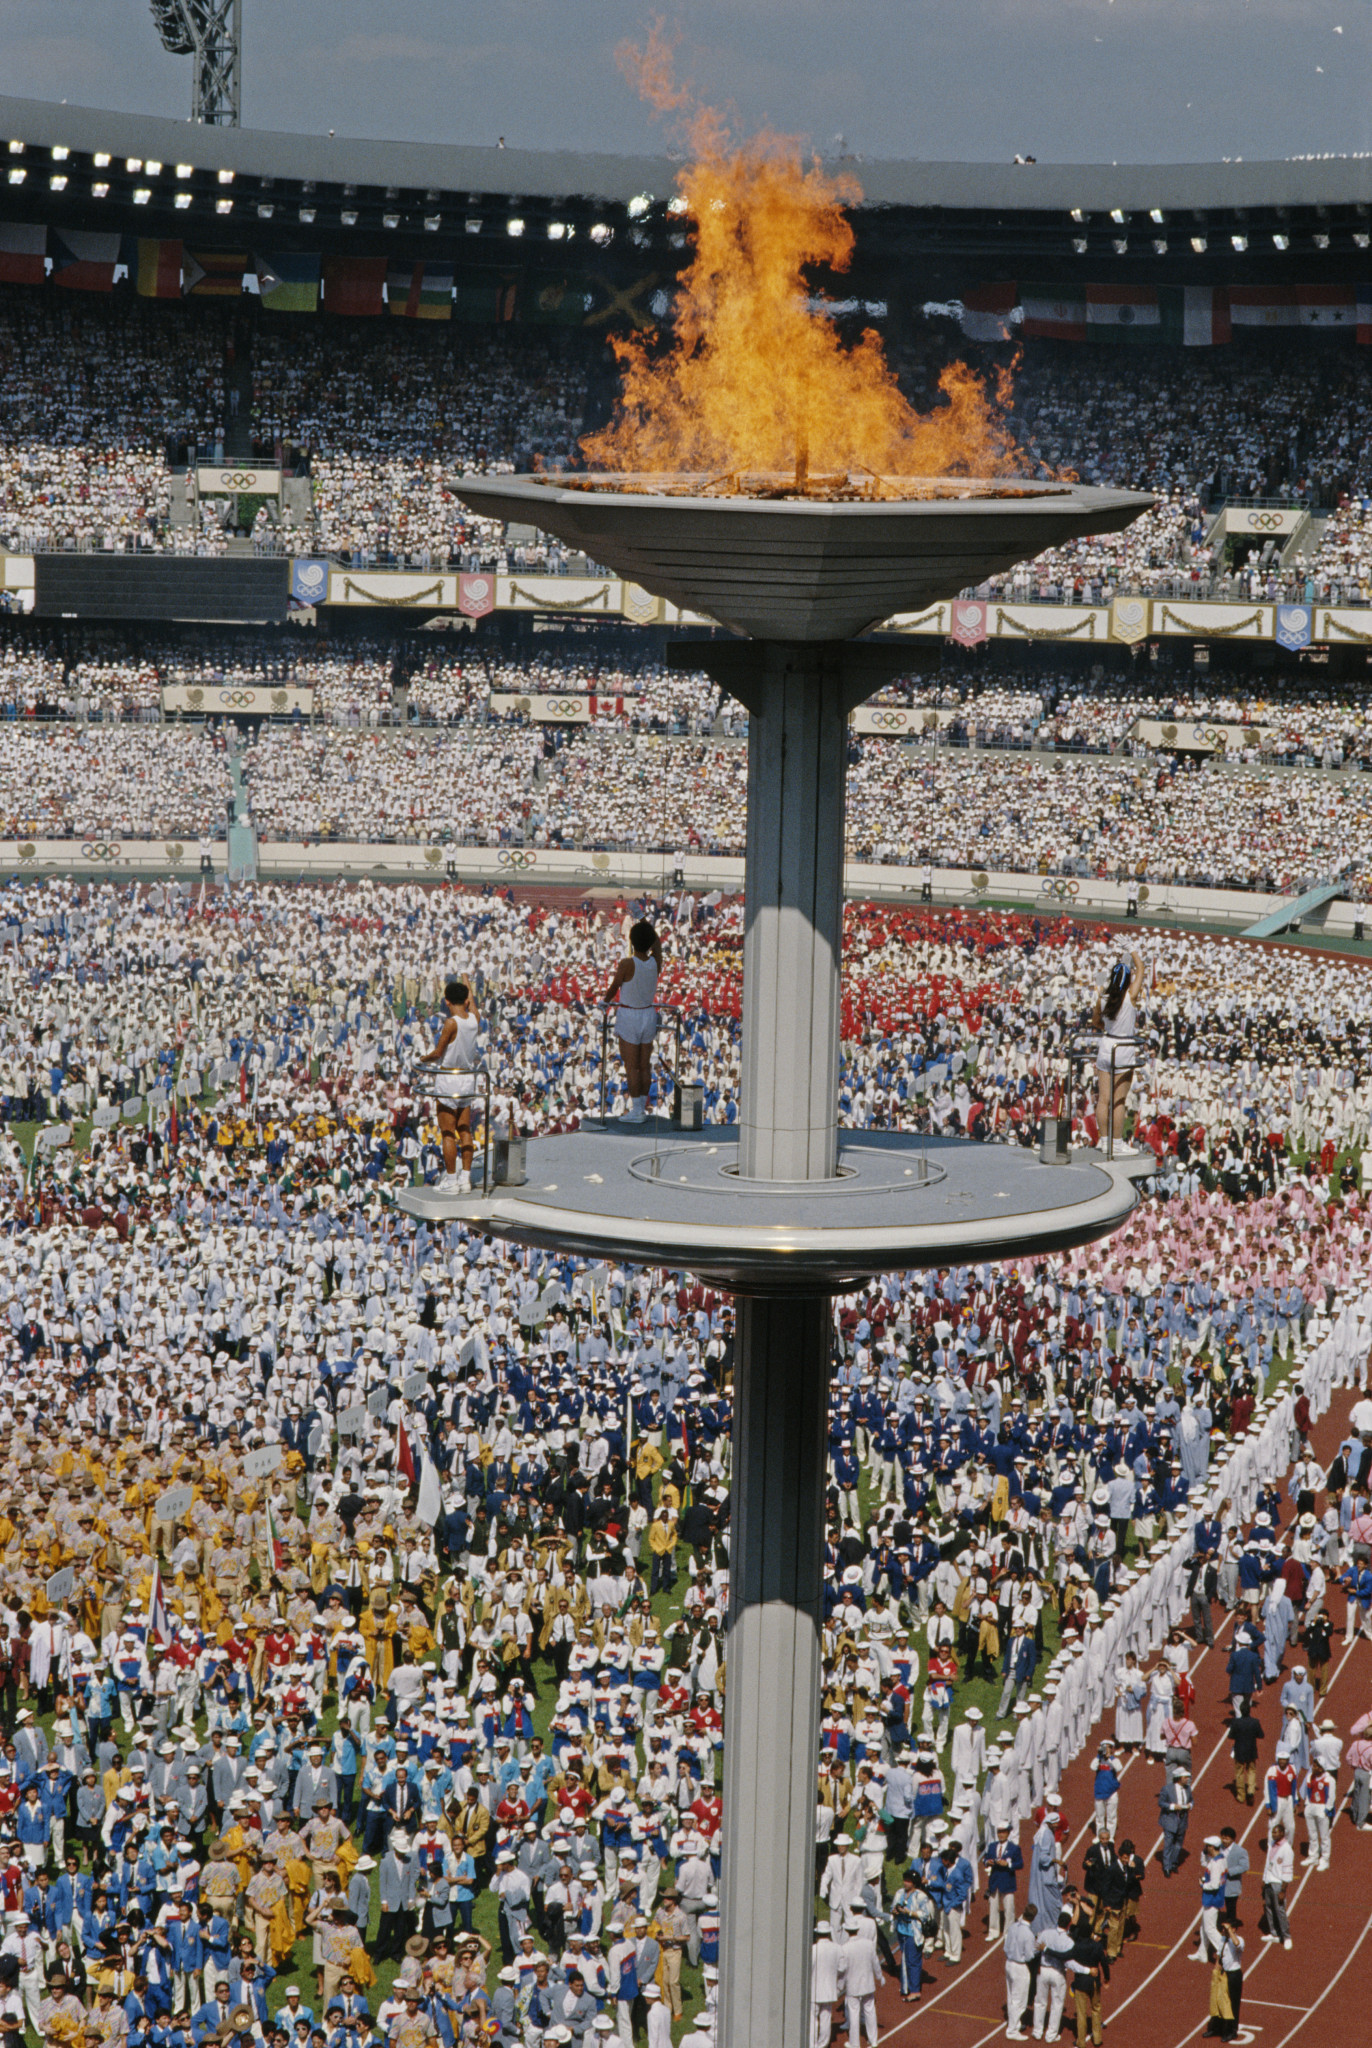 Sohn Kee-chung spoke oif being visibly moved by the Opening Ceremony of the 1988 Summer Olympics in Seoul, South Korea ©Getty Images